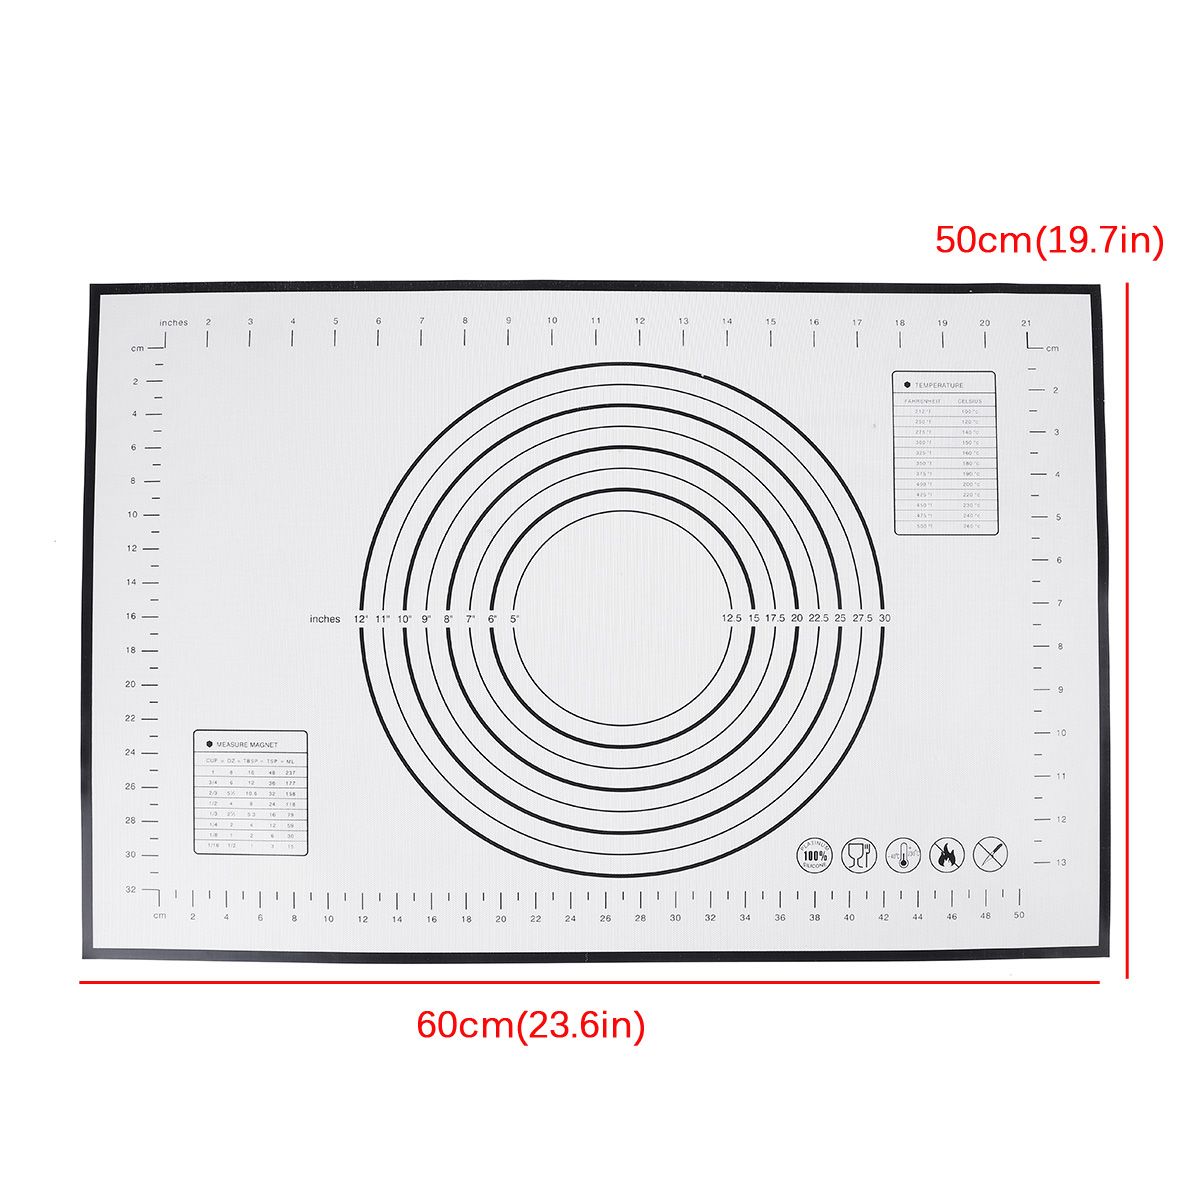 Dough-Rolling-Silicone-Pad-Pastry-Mat-Bakeware-Liner-Baking-Mat-Non-Stick-Tool-1708801